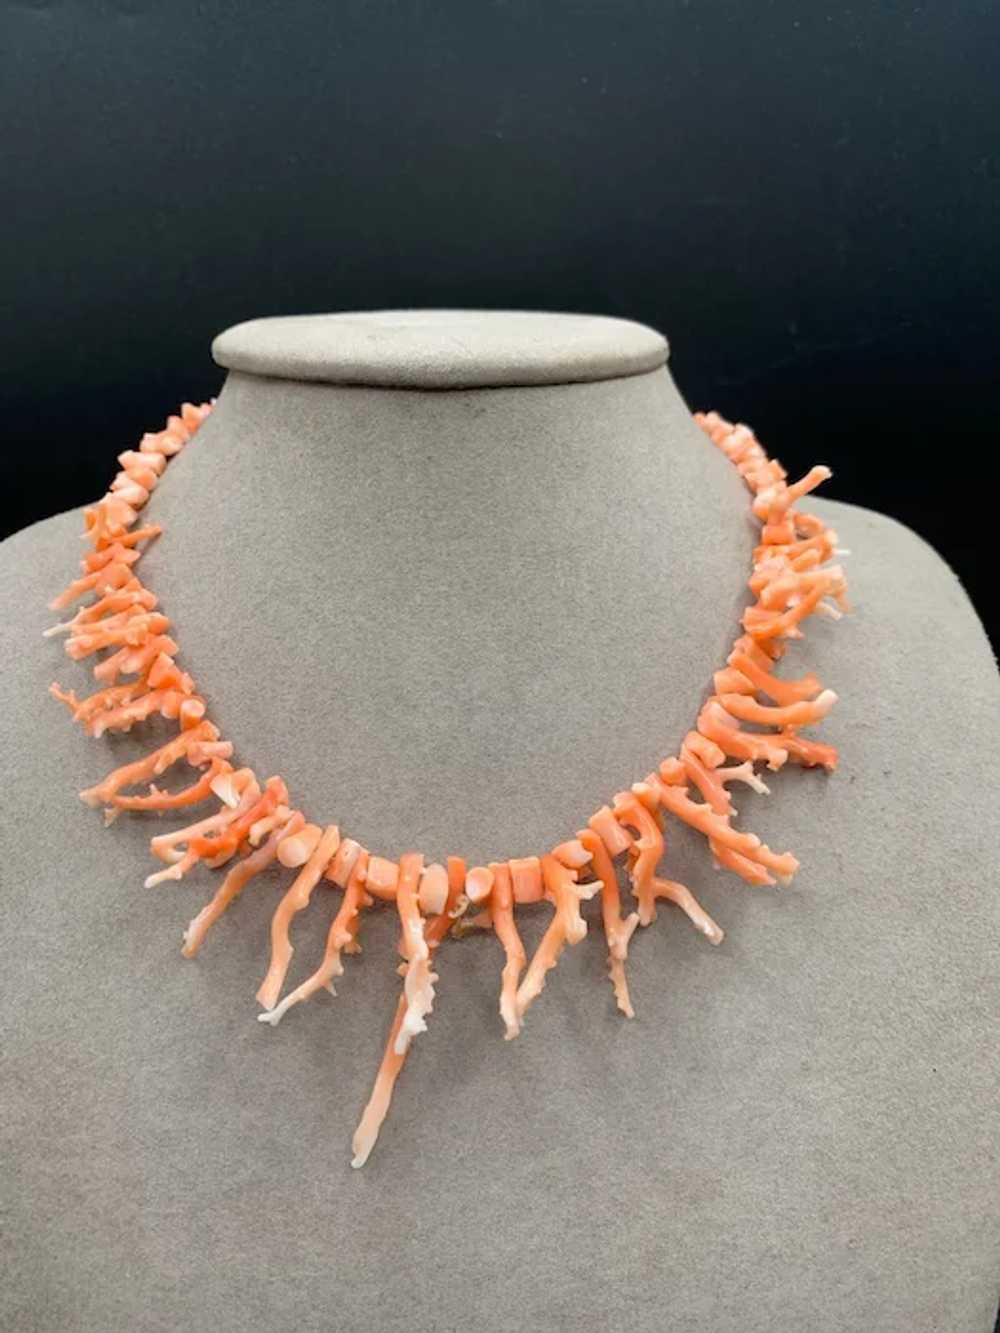 Branch Coral Necklace Pink Salmon Graduated Bib n… - image 2